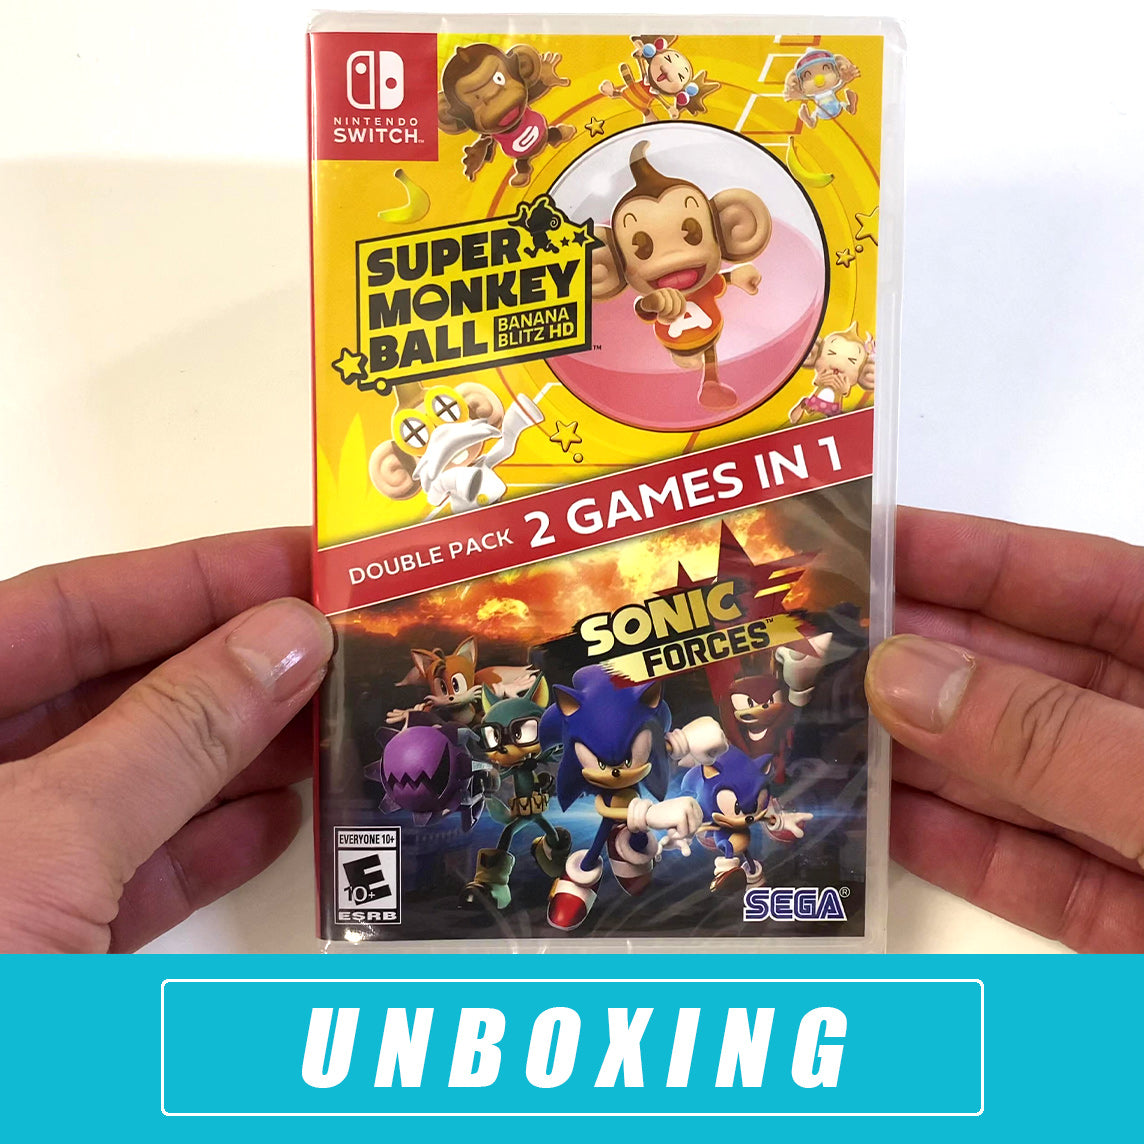 Sonic Forces + Super Monkey Ball: Banana Blitz HD Double Pack - (NSW) Nintendo Switch [UNBOXING] Video Games SEGA   